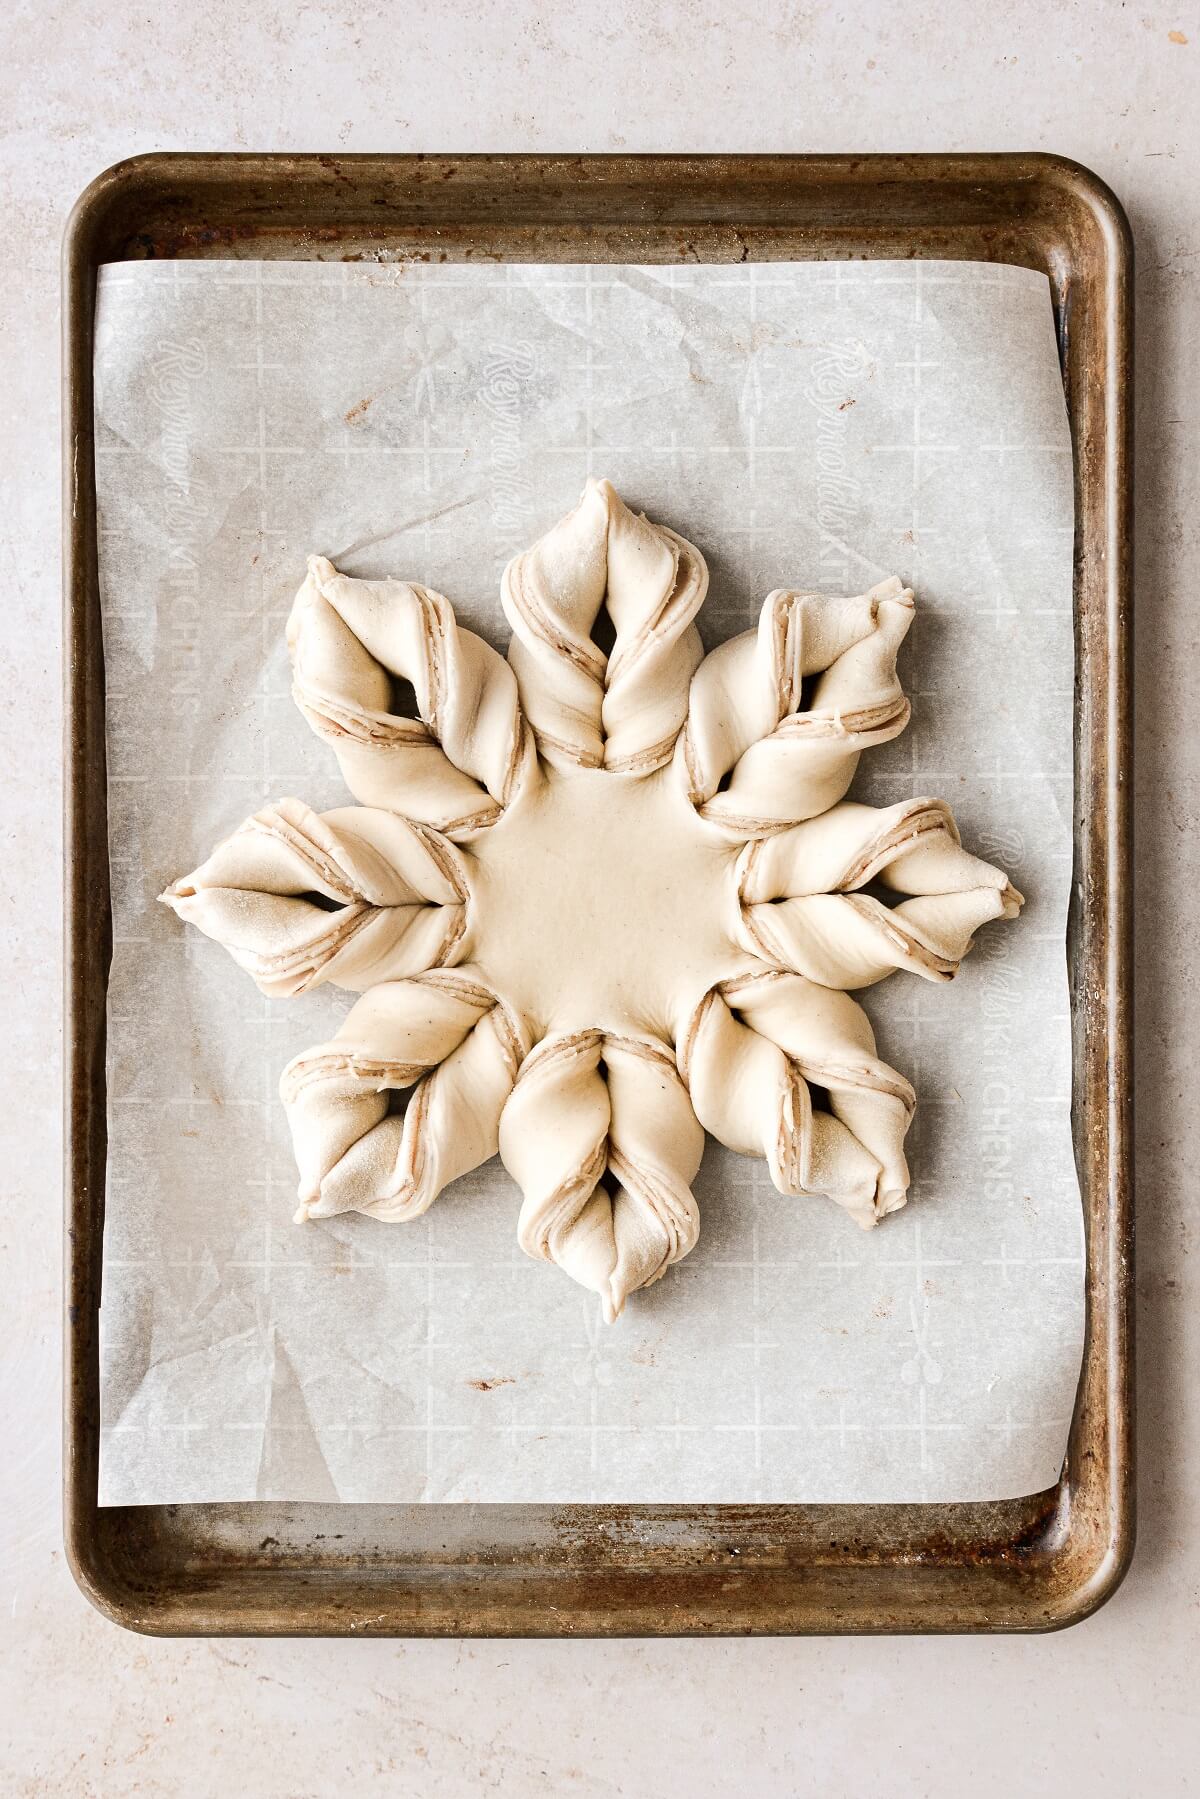 Cardamom almond star bread on a baking sheet, ready to be baked.